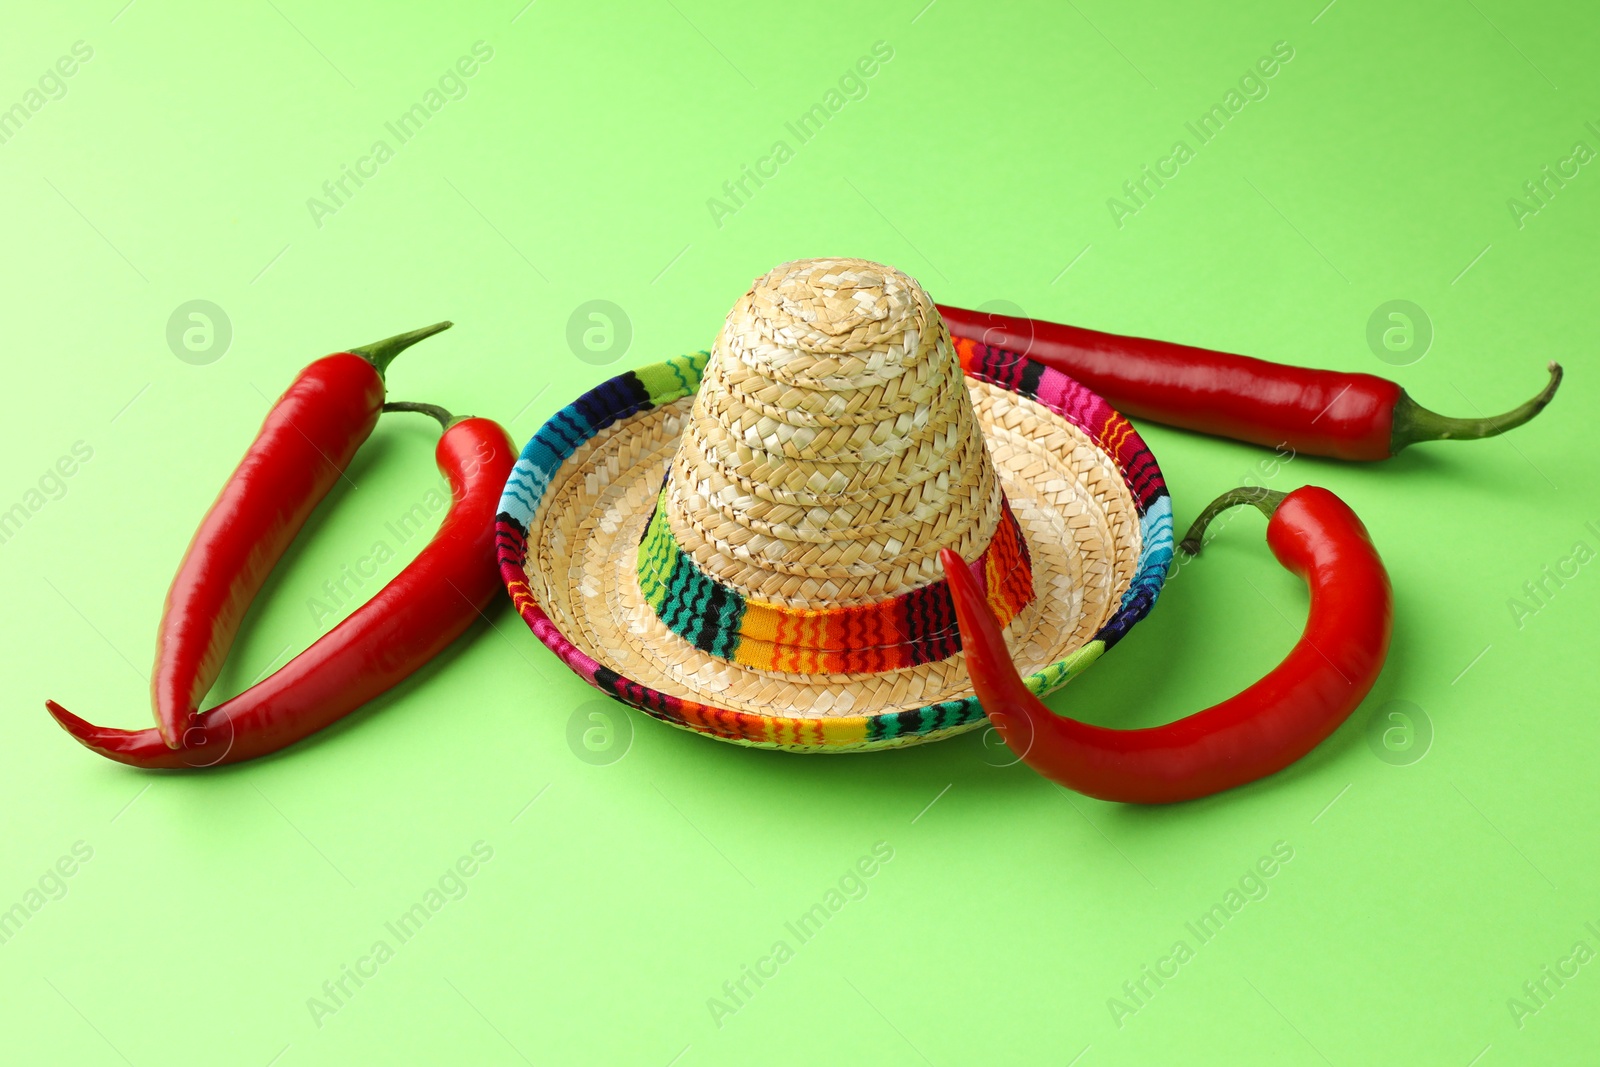 Photo of Mexican sombrero hat and chili peppers on green background